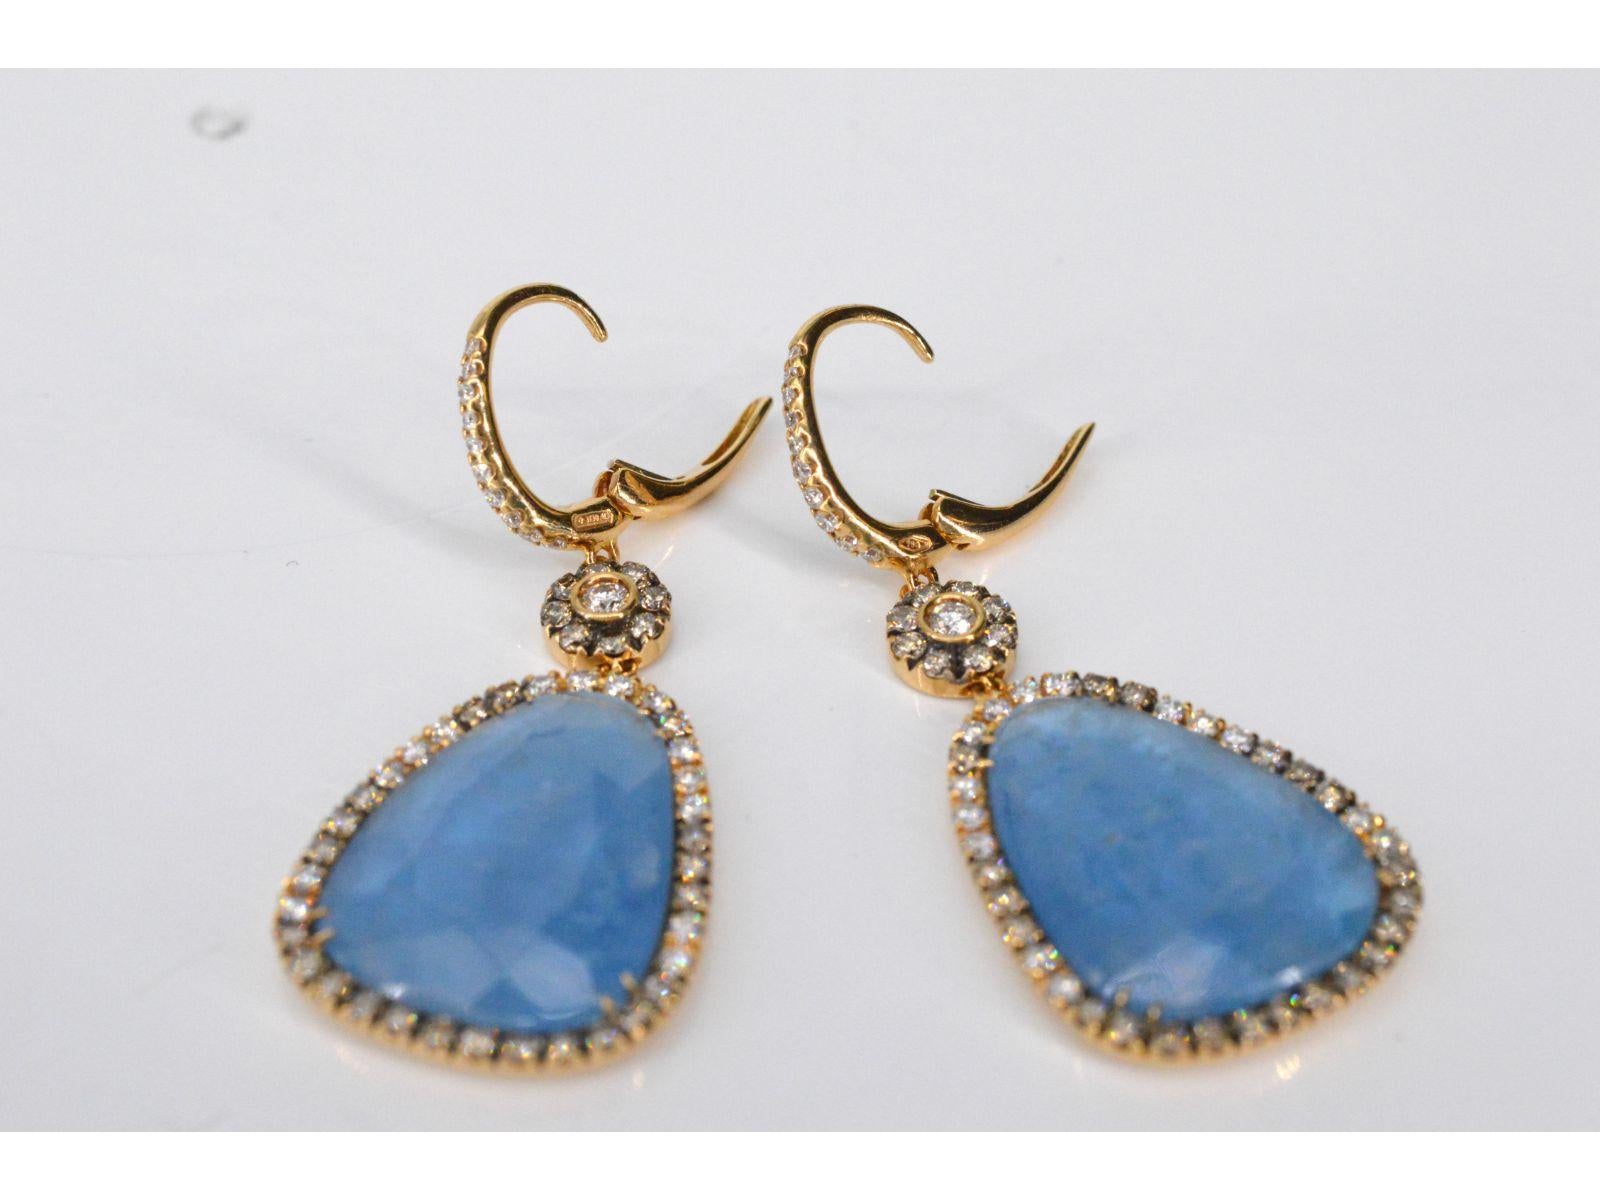 Brilliant Cut Crivelli - Golden earrings with large natural gemstones and a surround of diamon For Sale